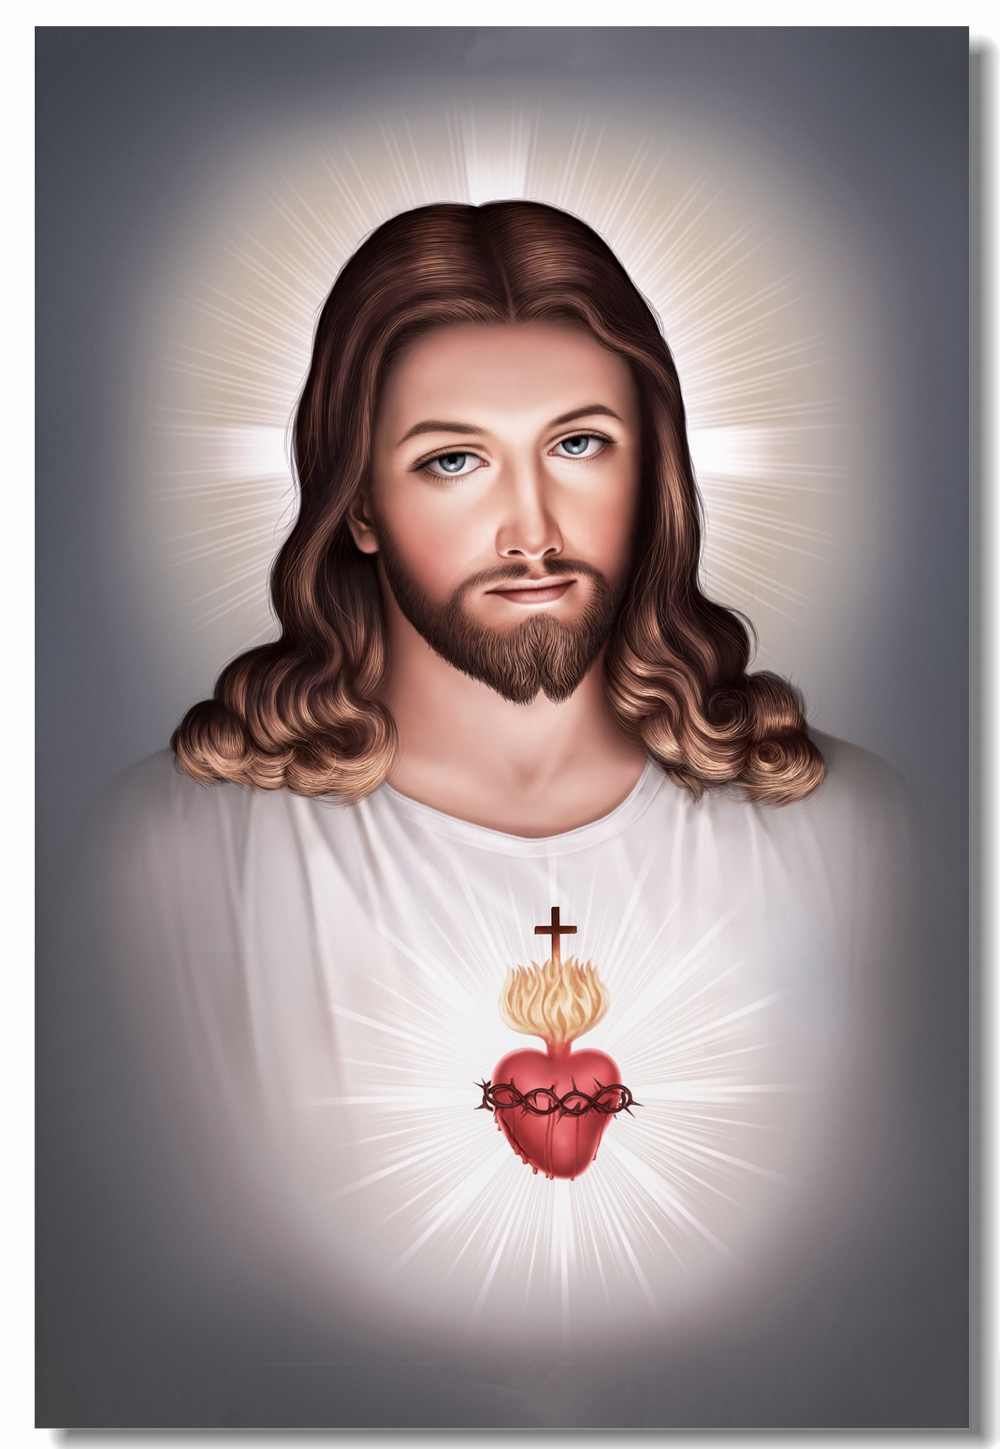 Custom Canvas Wall Decor Sacred Heart Of Jesus Christ Poster Divine Mercy Wall Stickers Mural Office Bedroom Wallpaper #. hockey wall stickers. wall stickerwall decor